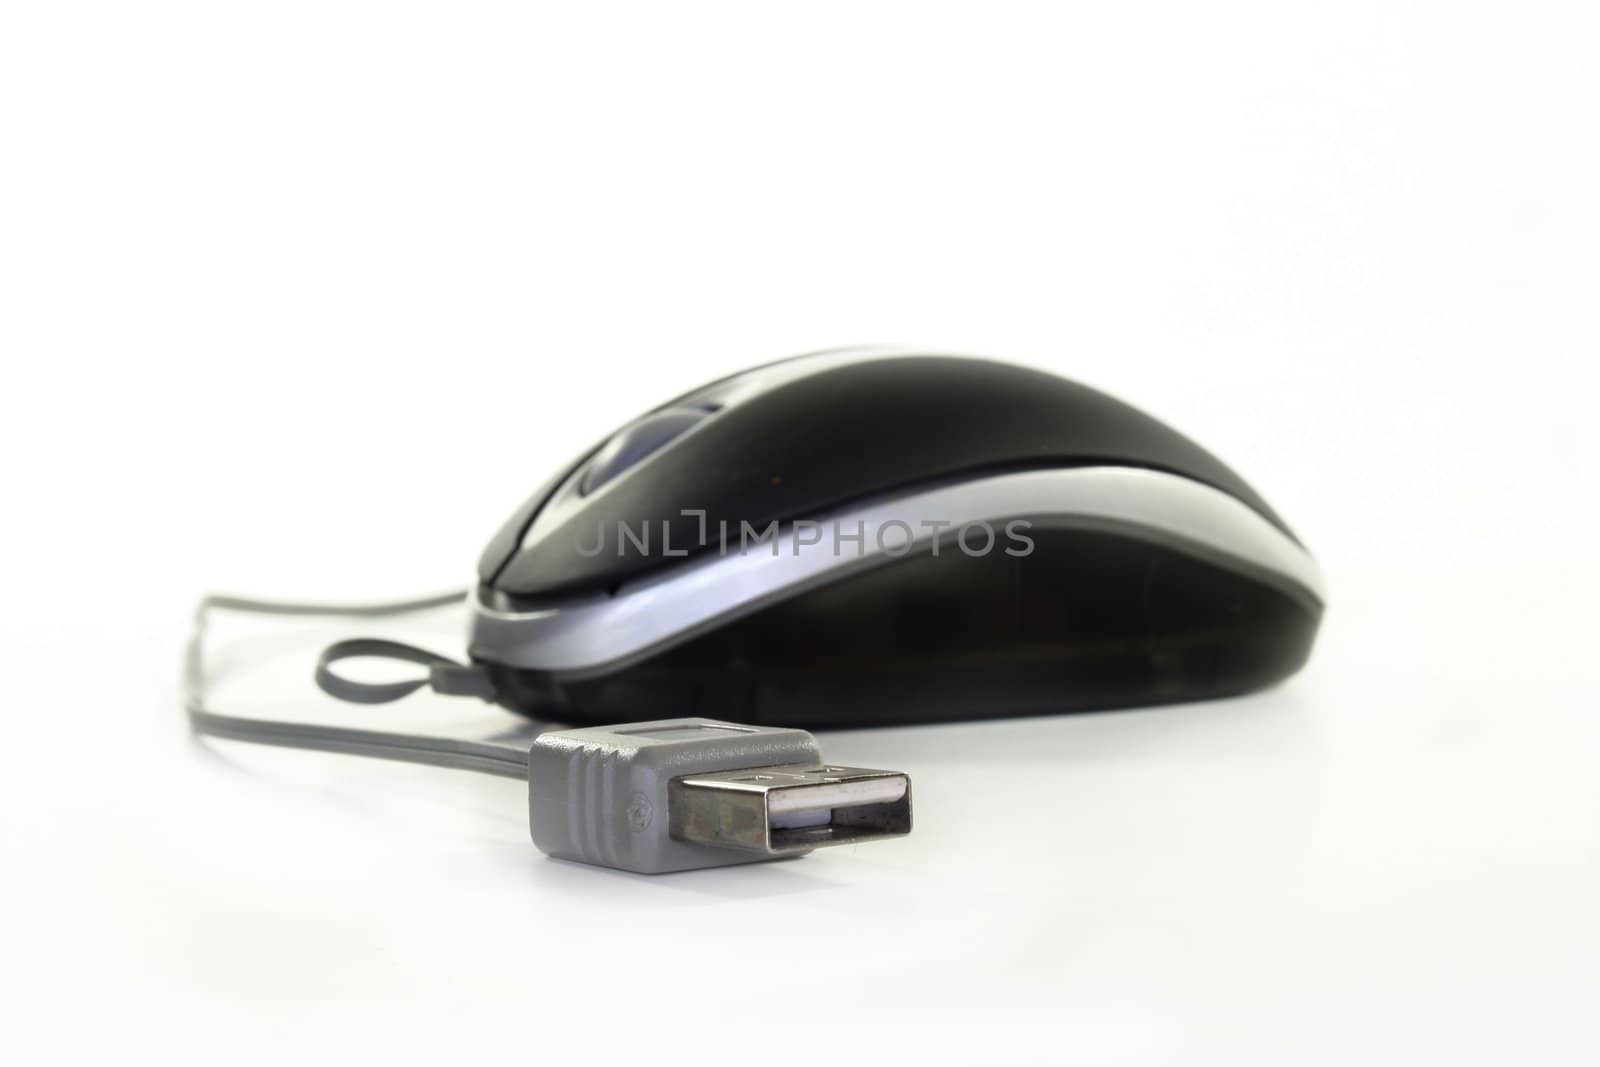 Computer mouse with cable on white background